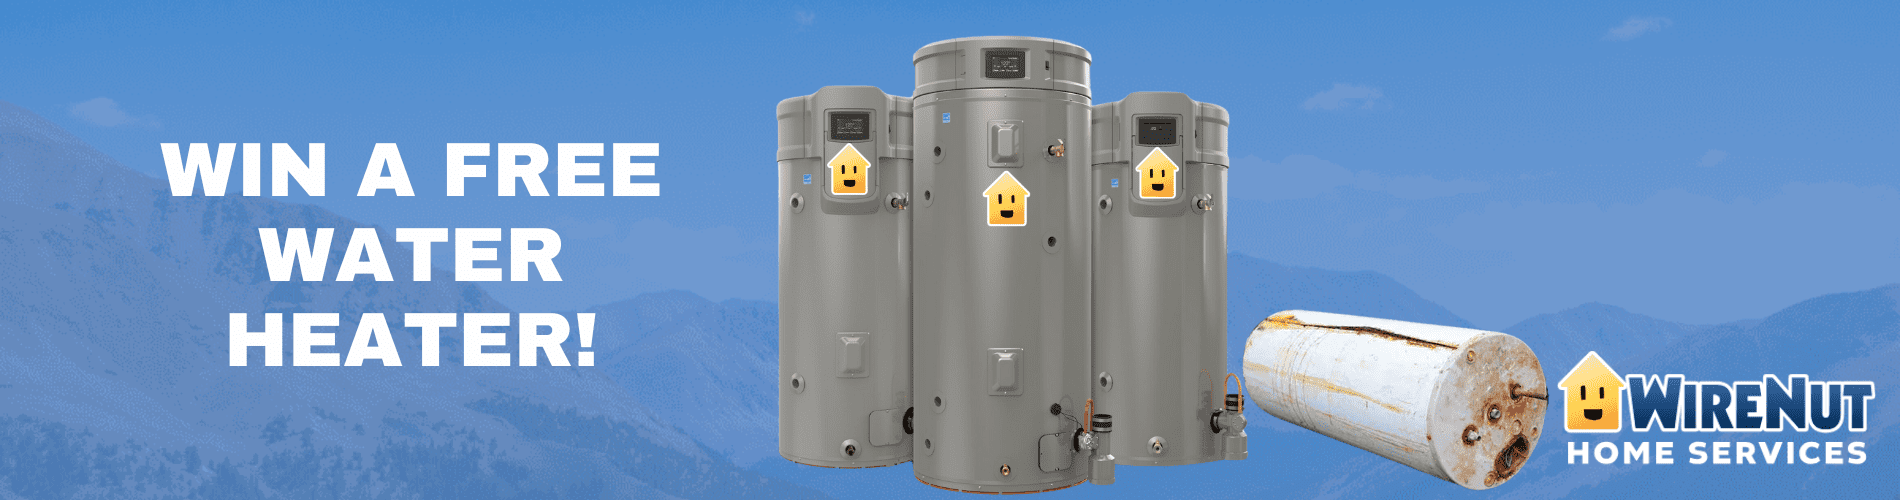 Mobile Oldest Water Heater Contest